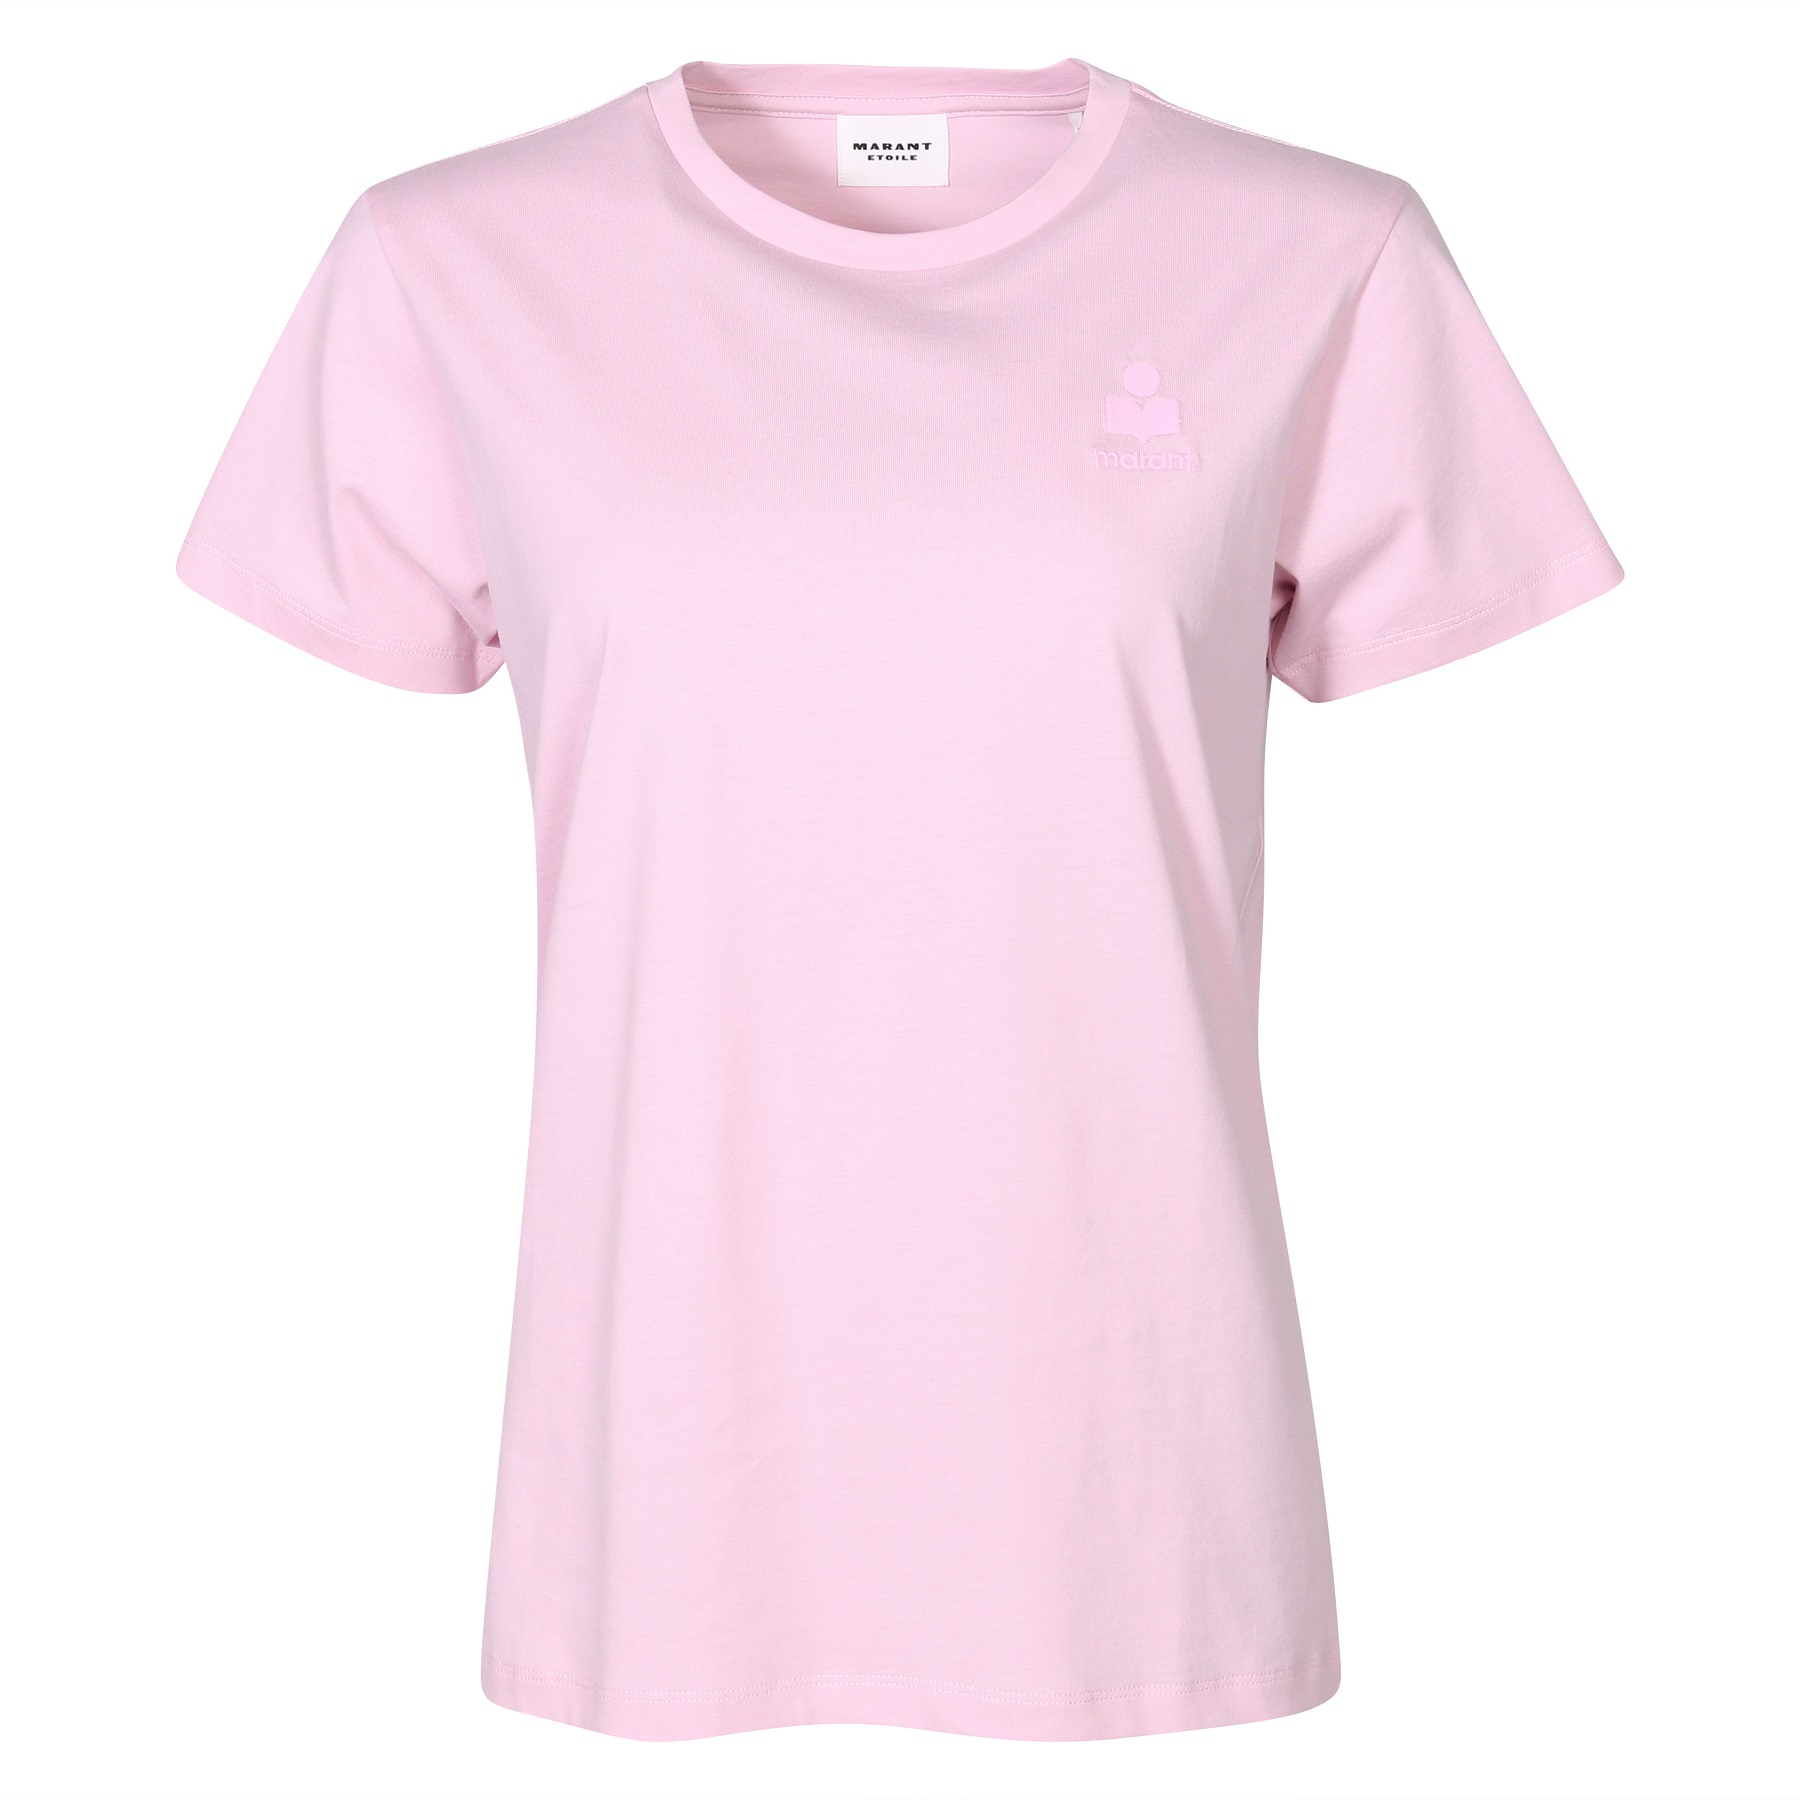 ISABEL MARANT ÉTOILE Aby Logo T-Shirt in Light Pink L